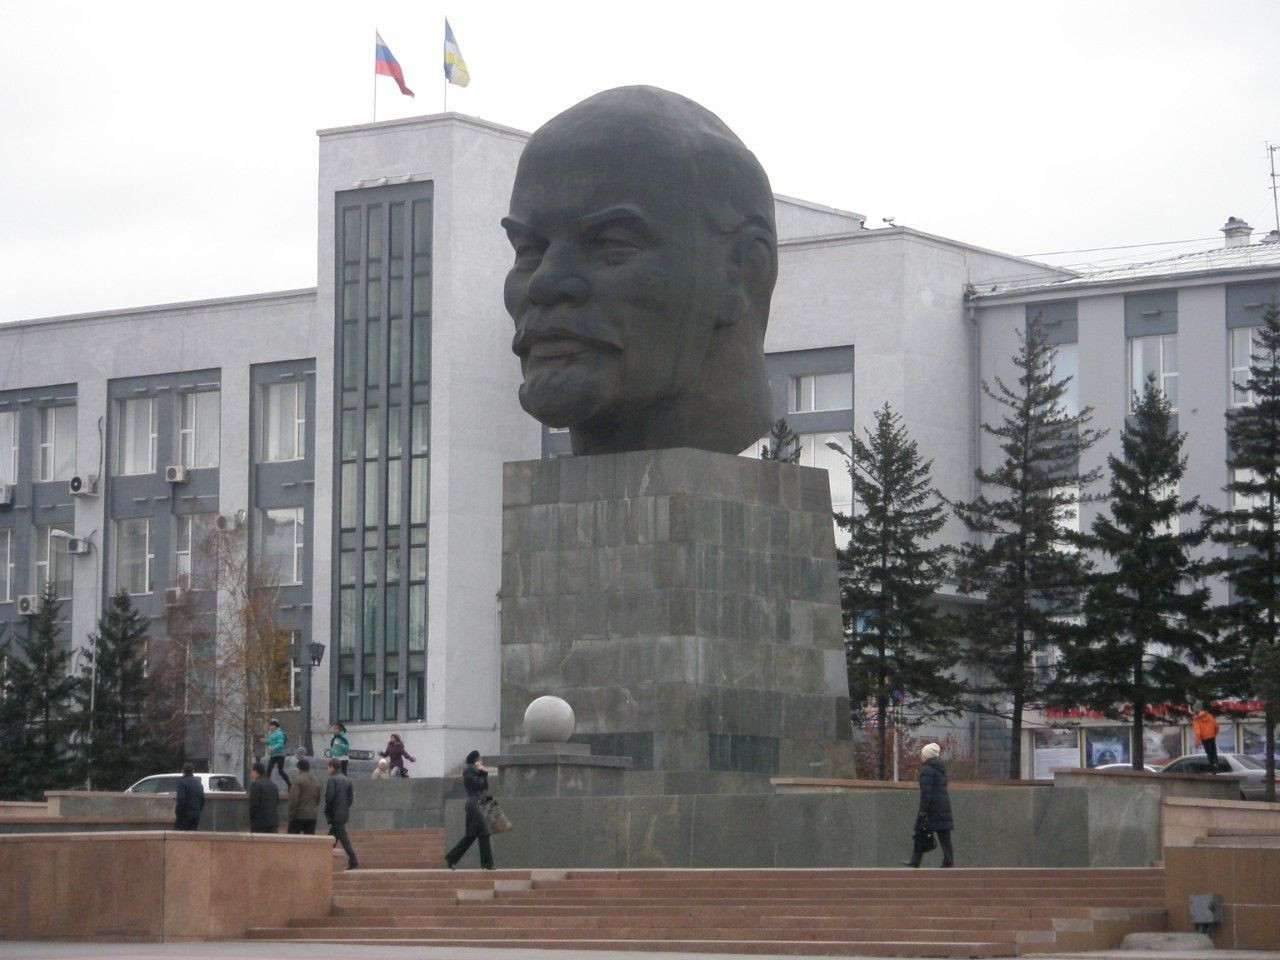 Ulan-Ude is famous for a giant statue of Vladimir Lenin ©Wikipedia